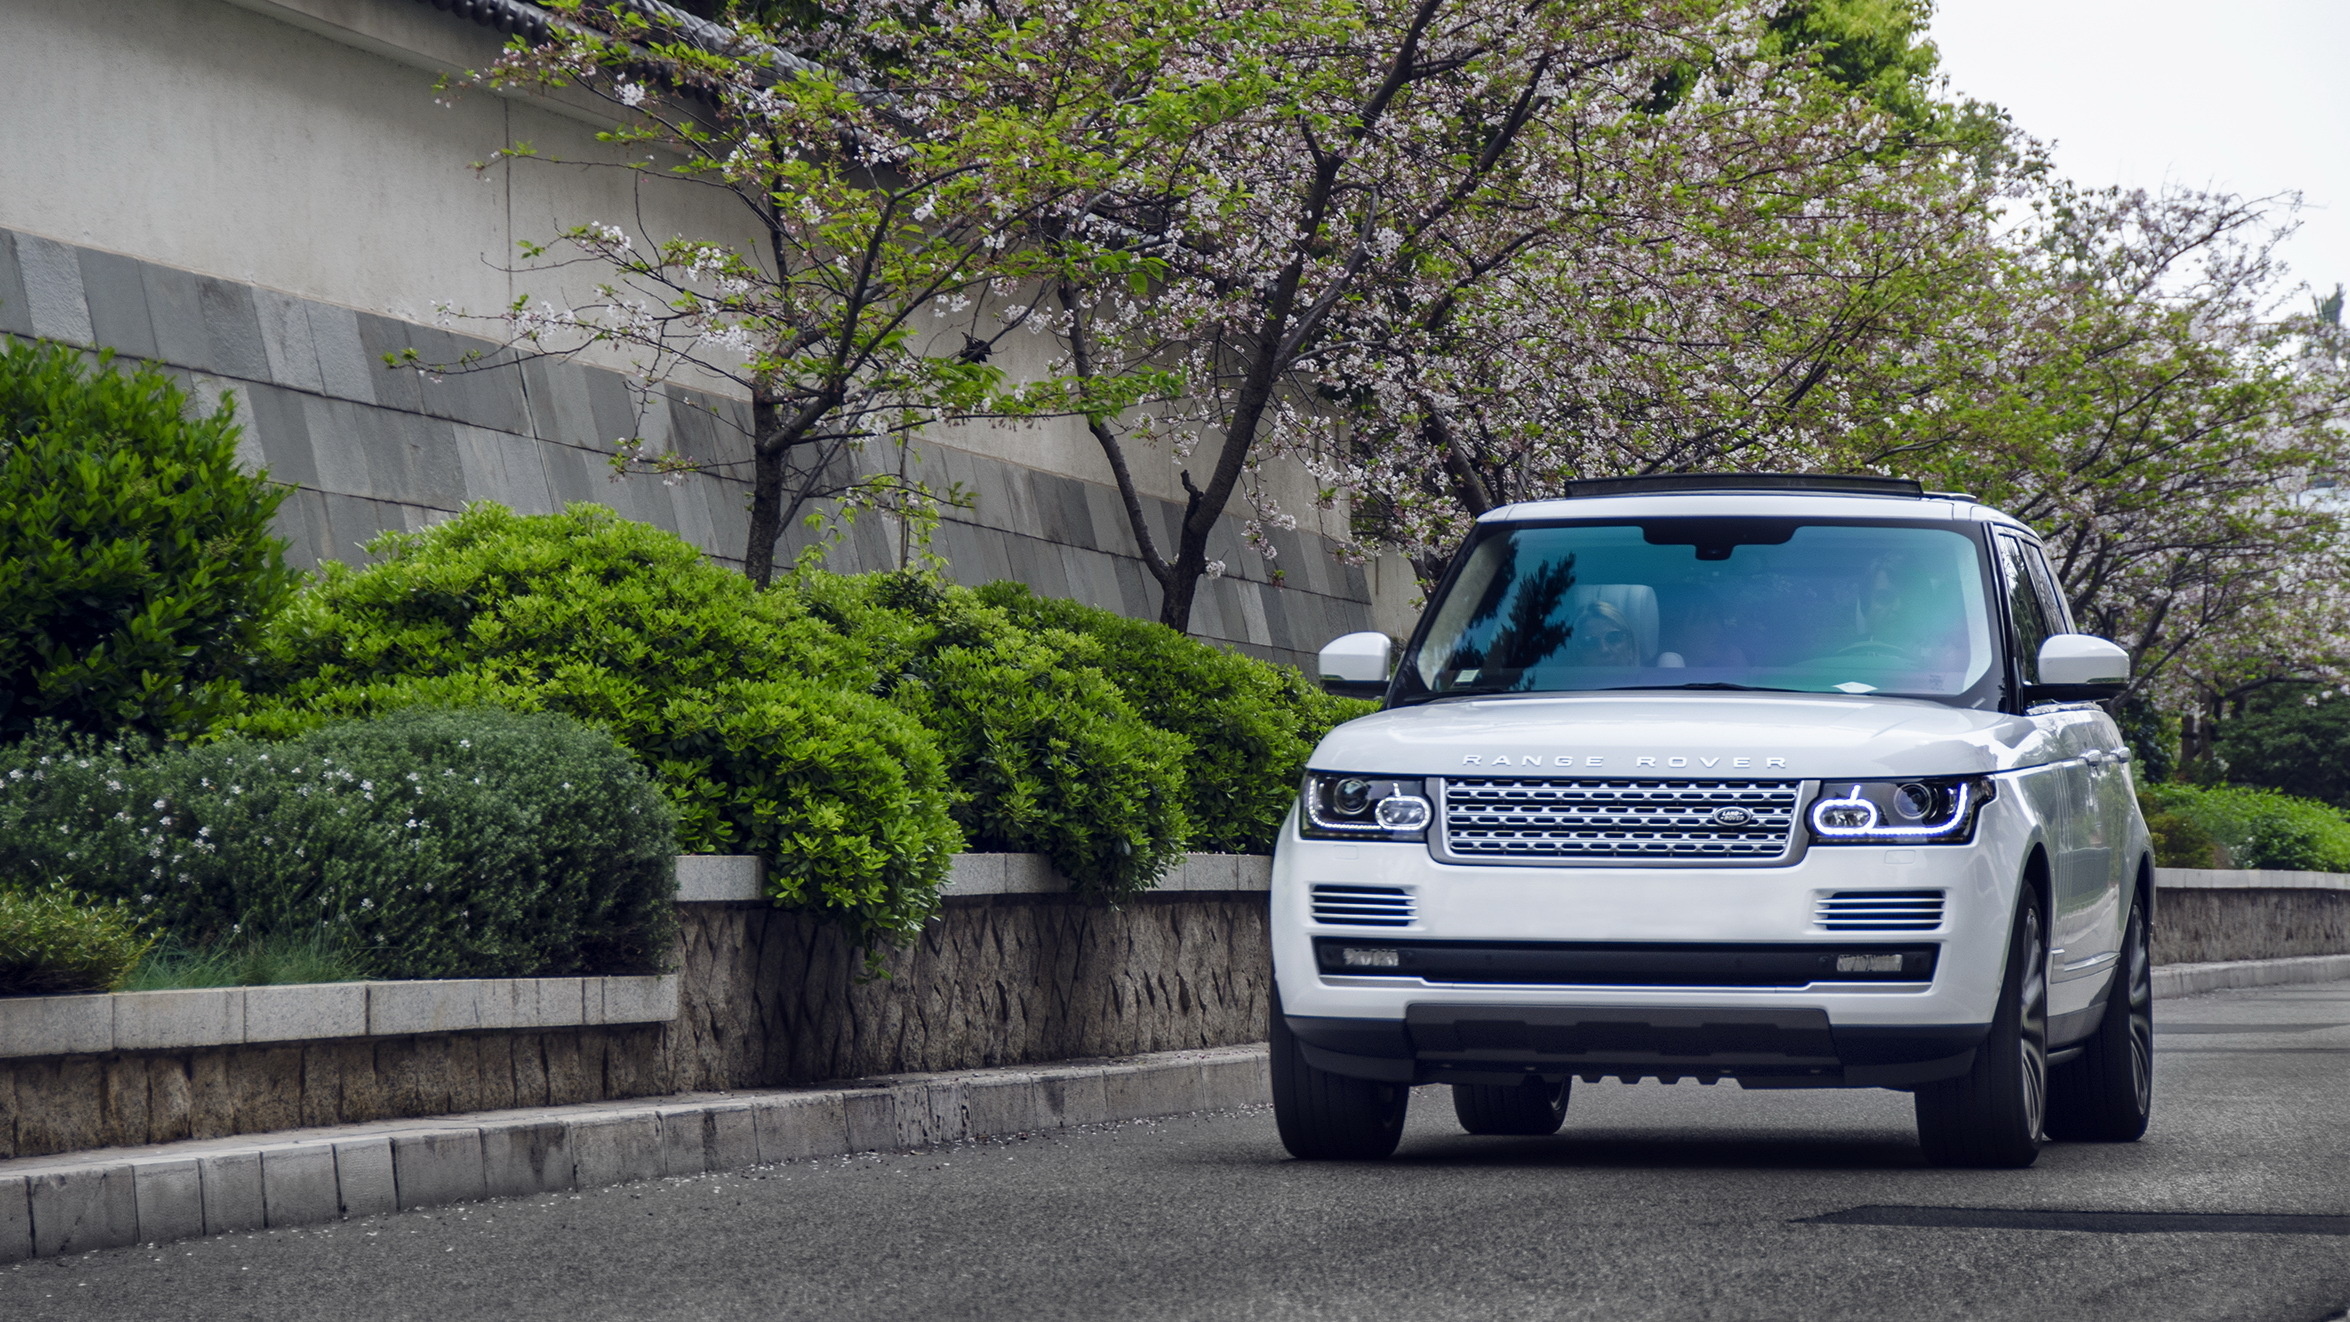 69064 download wallpaper auto, range rover, cars, white, suv screensavers and pictures for free